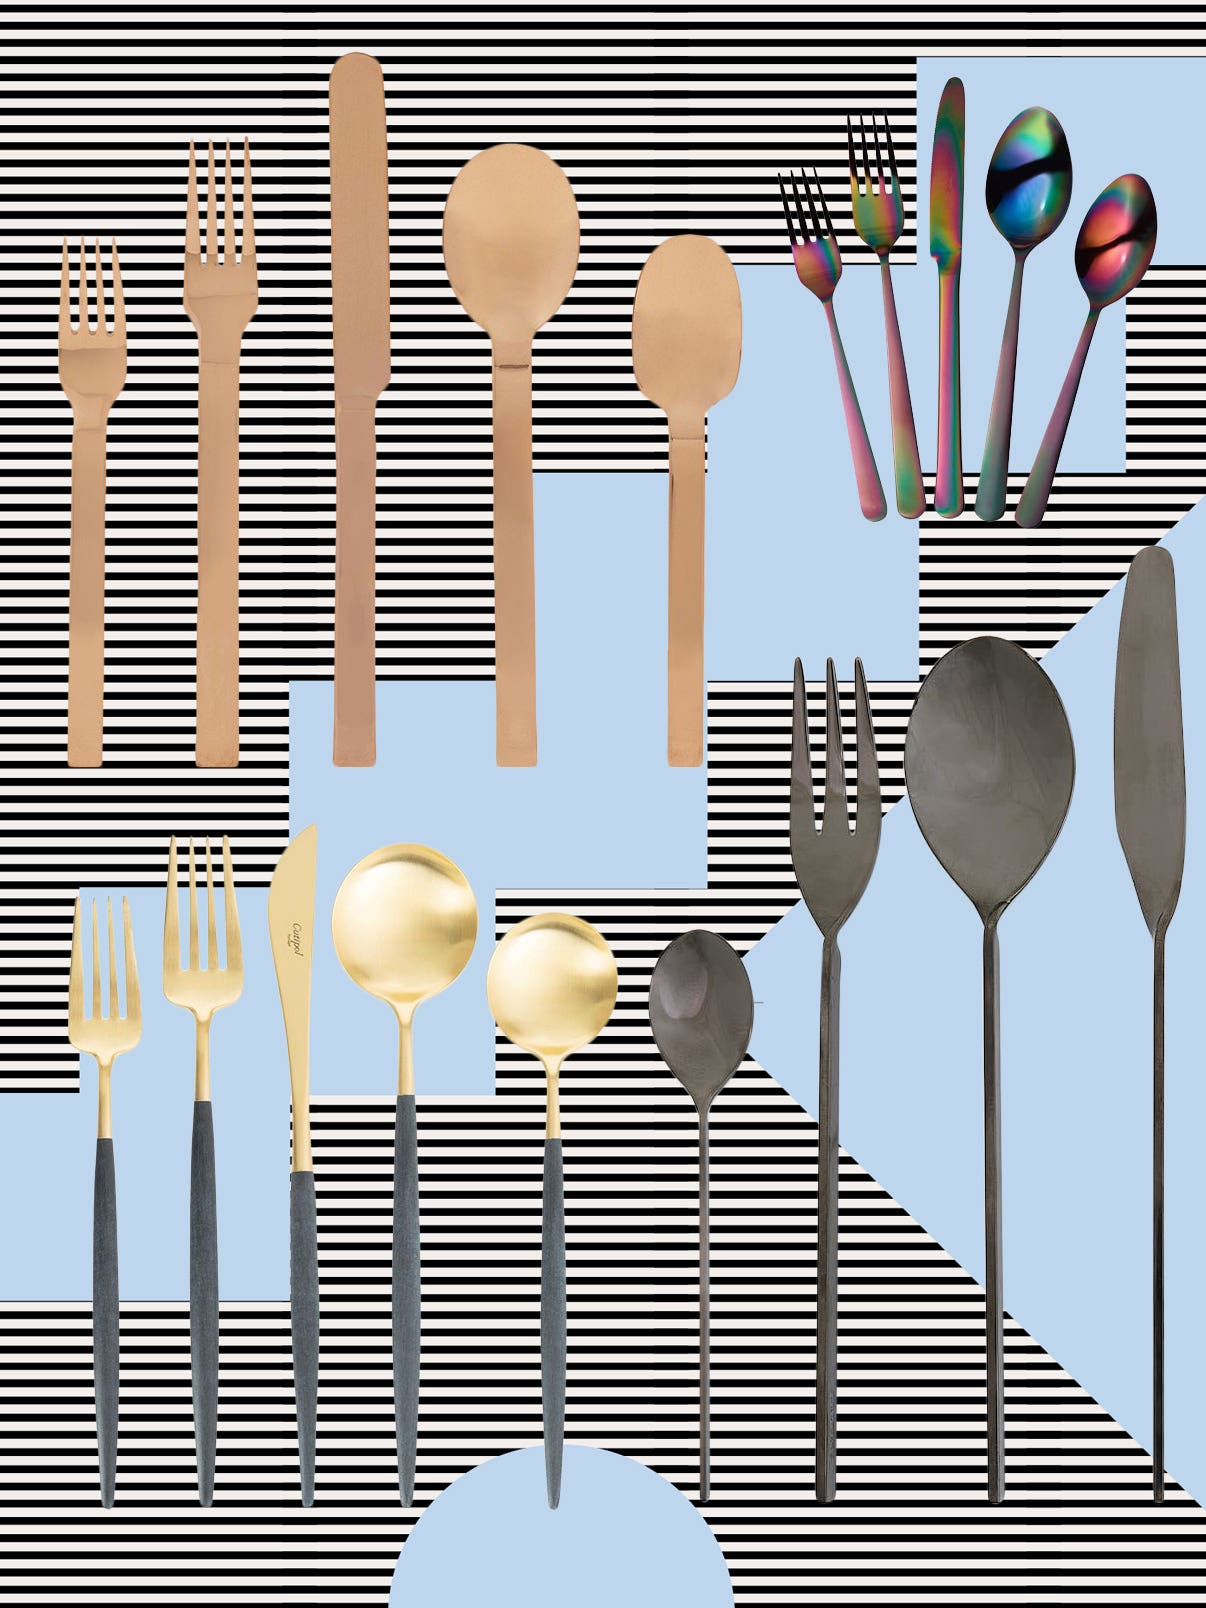 Proof That, Yes, Stylish Flatware Does Exist at Every Budget